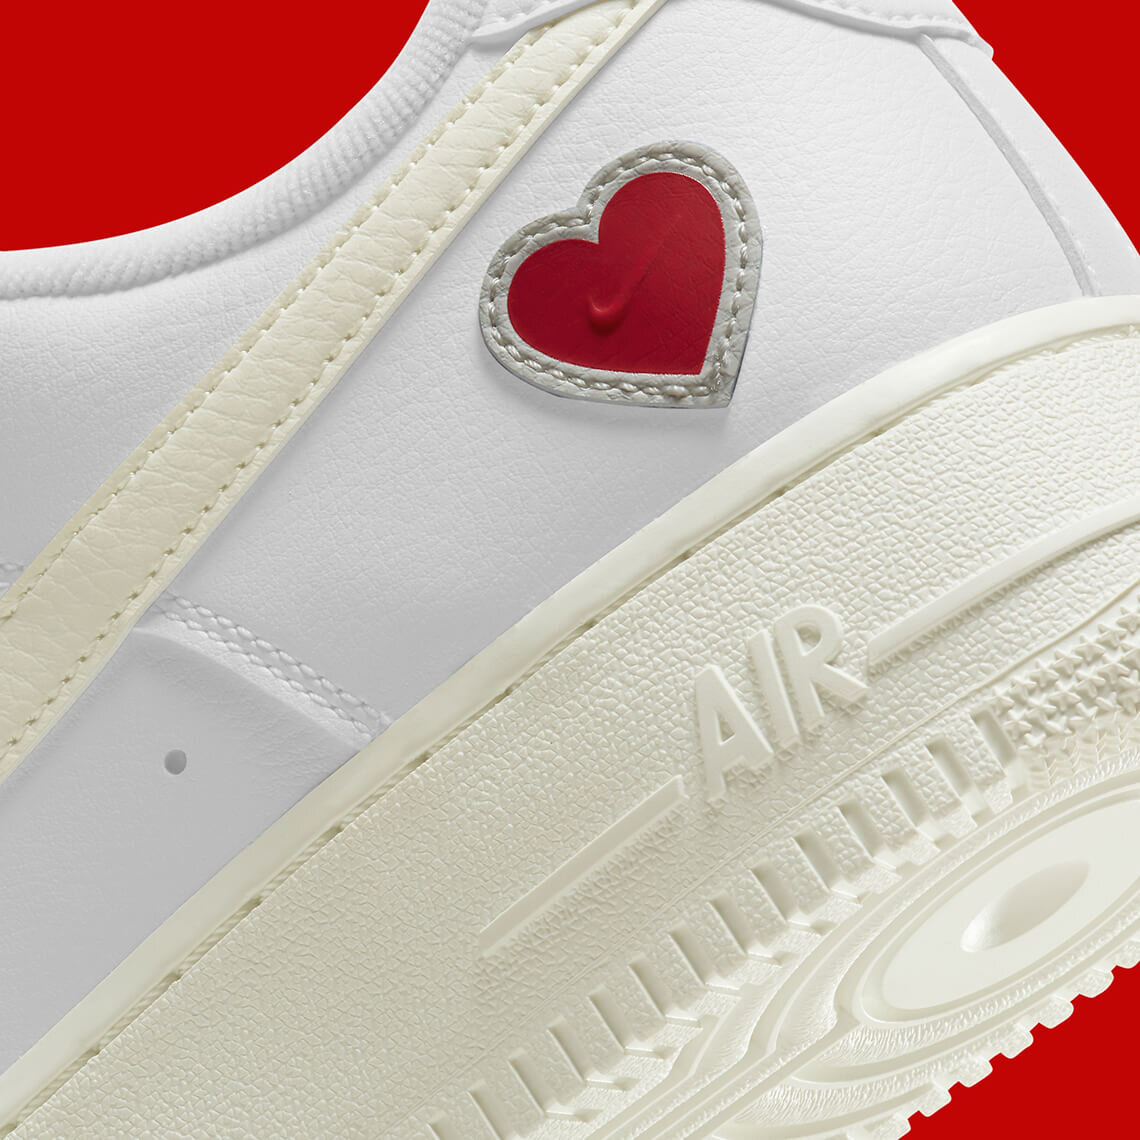 CNK-Nike-Air-Force-1-Valentines-Day-2021-heart-close-up.jpg